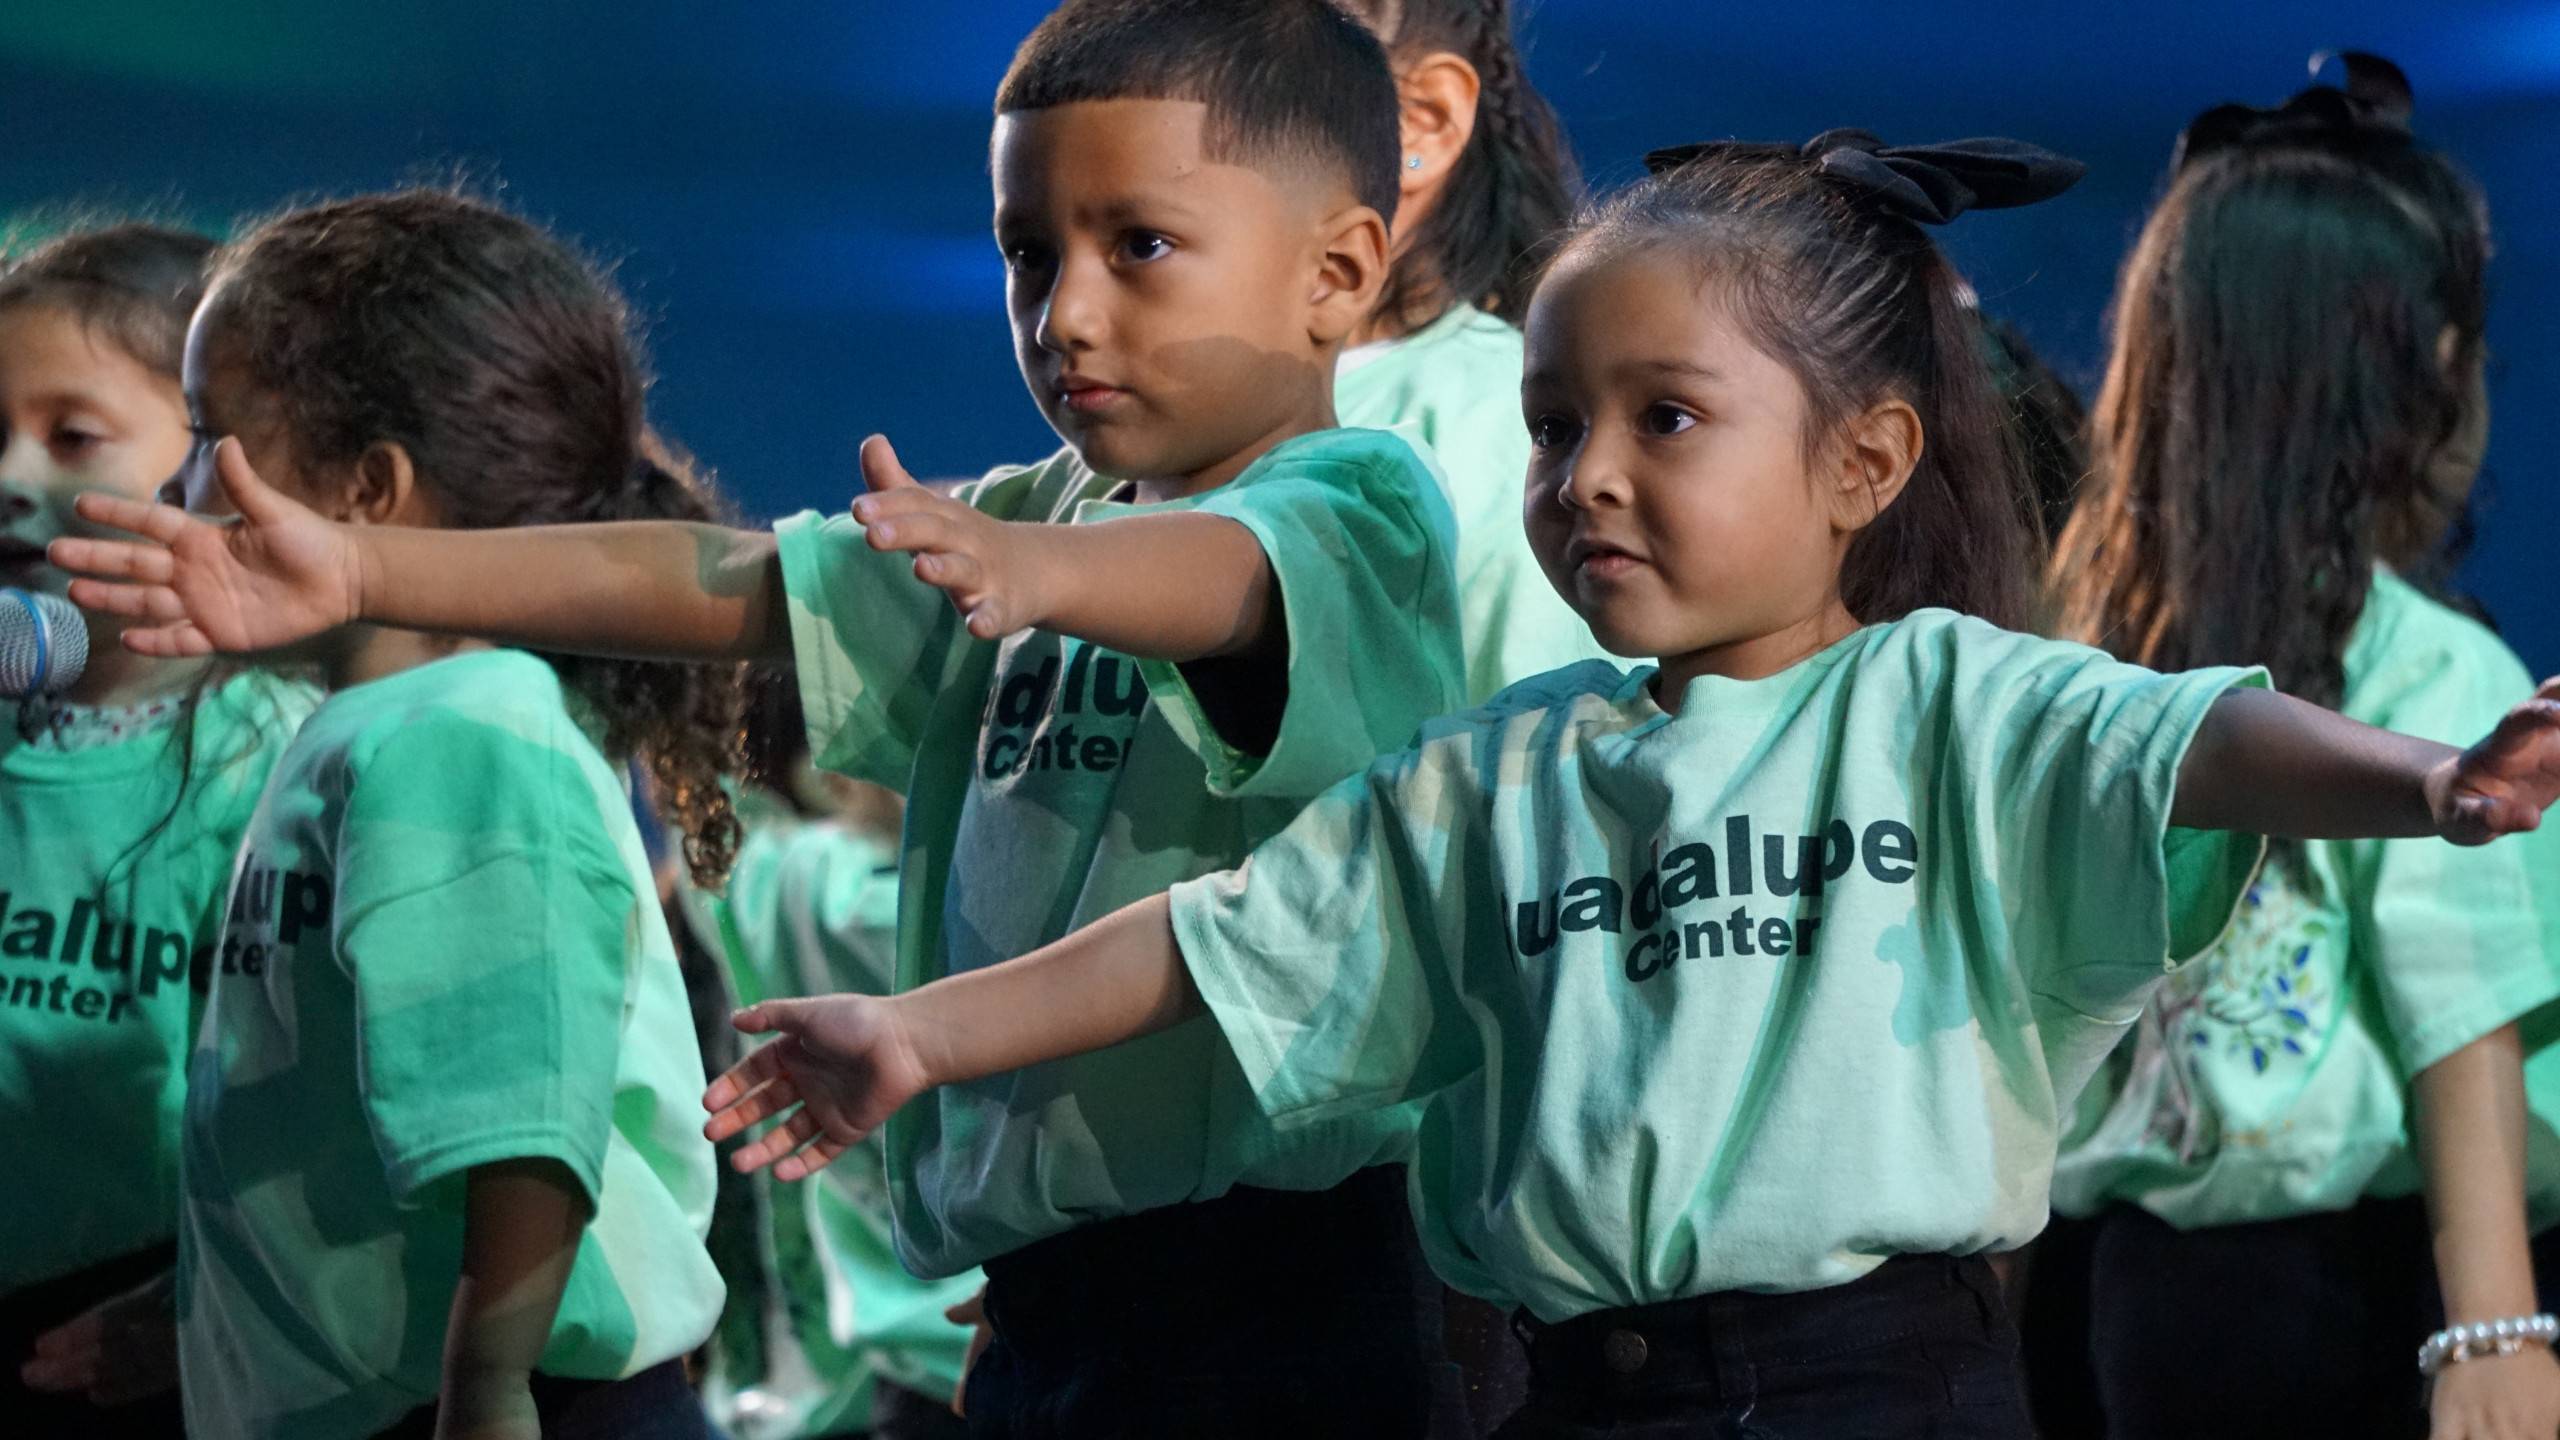 Six Guadalupe Center kids perform during Elevate special event